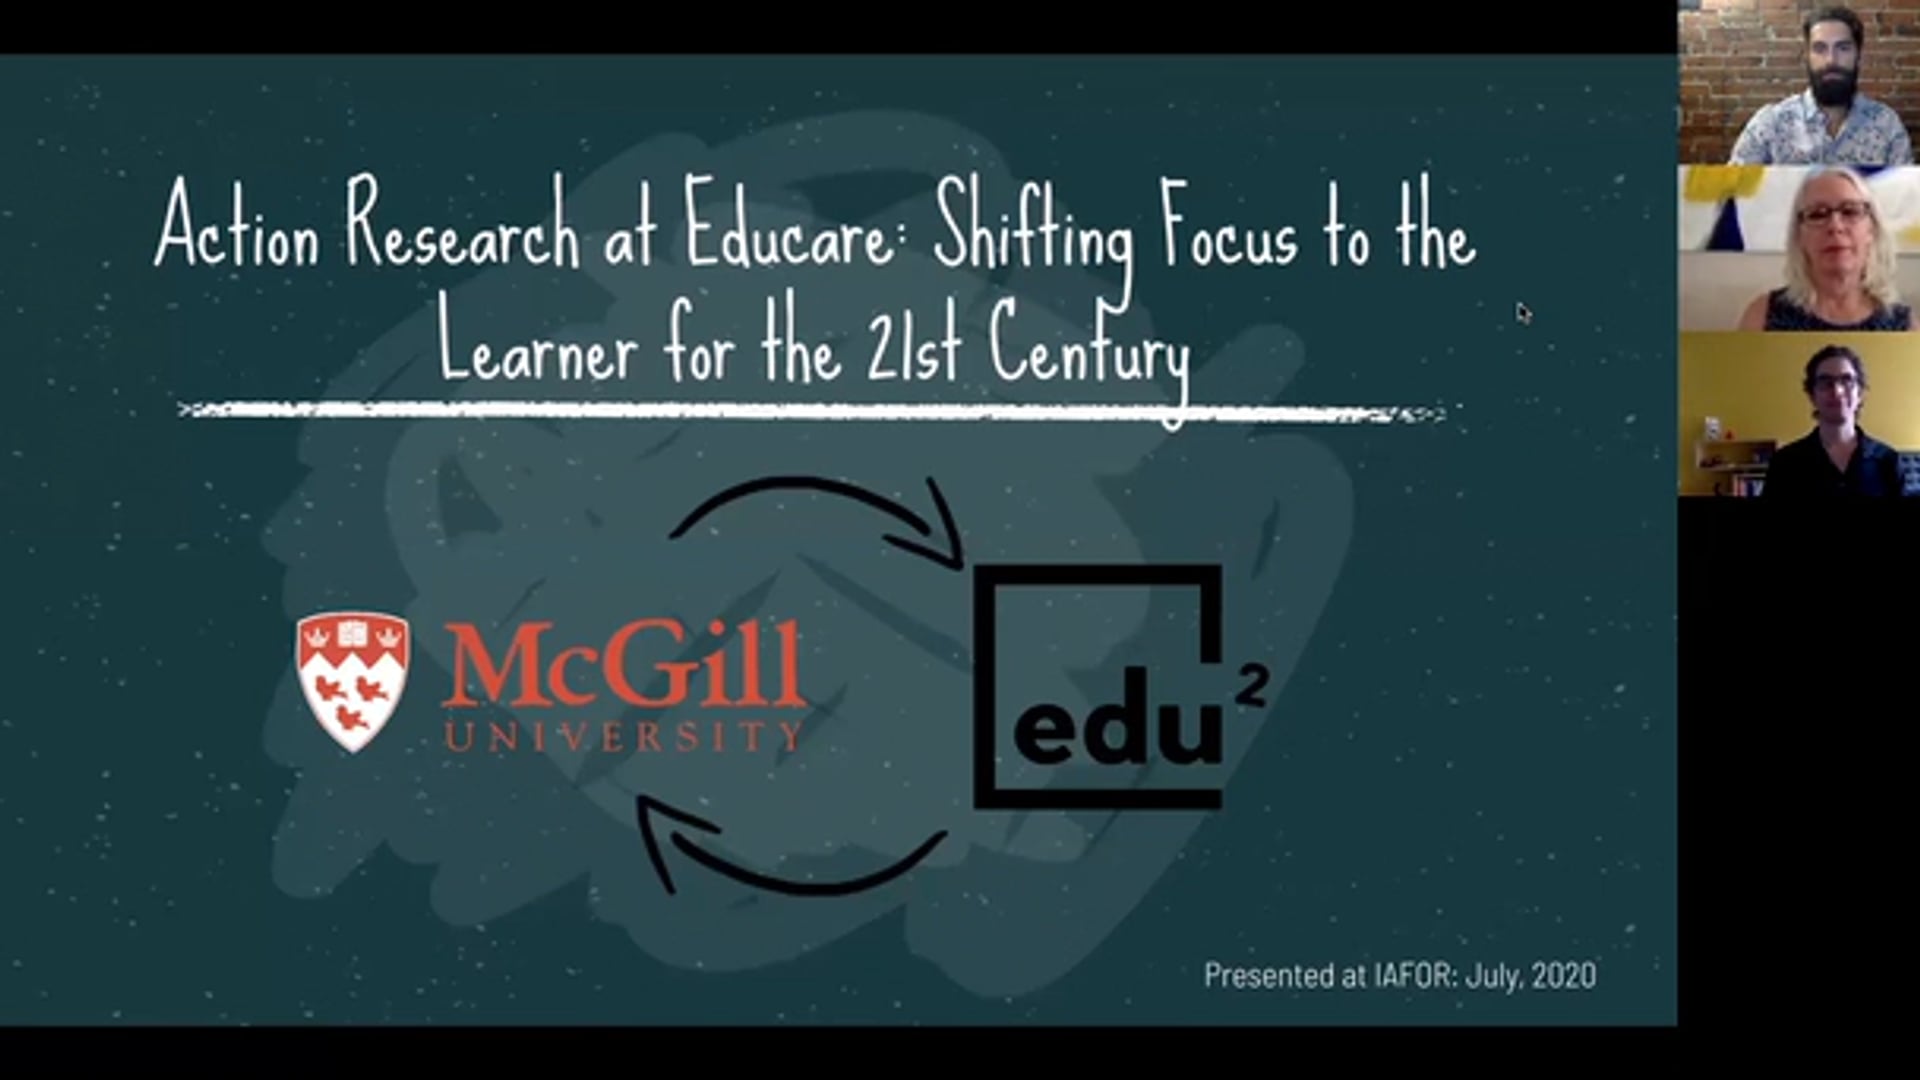 Action Research at Educare: Shifting Focus to the Learner for the 21st Century